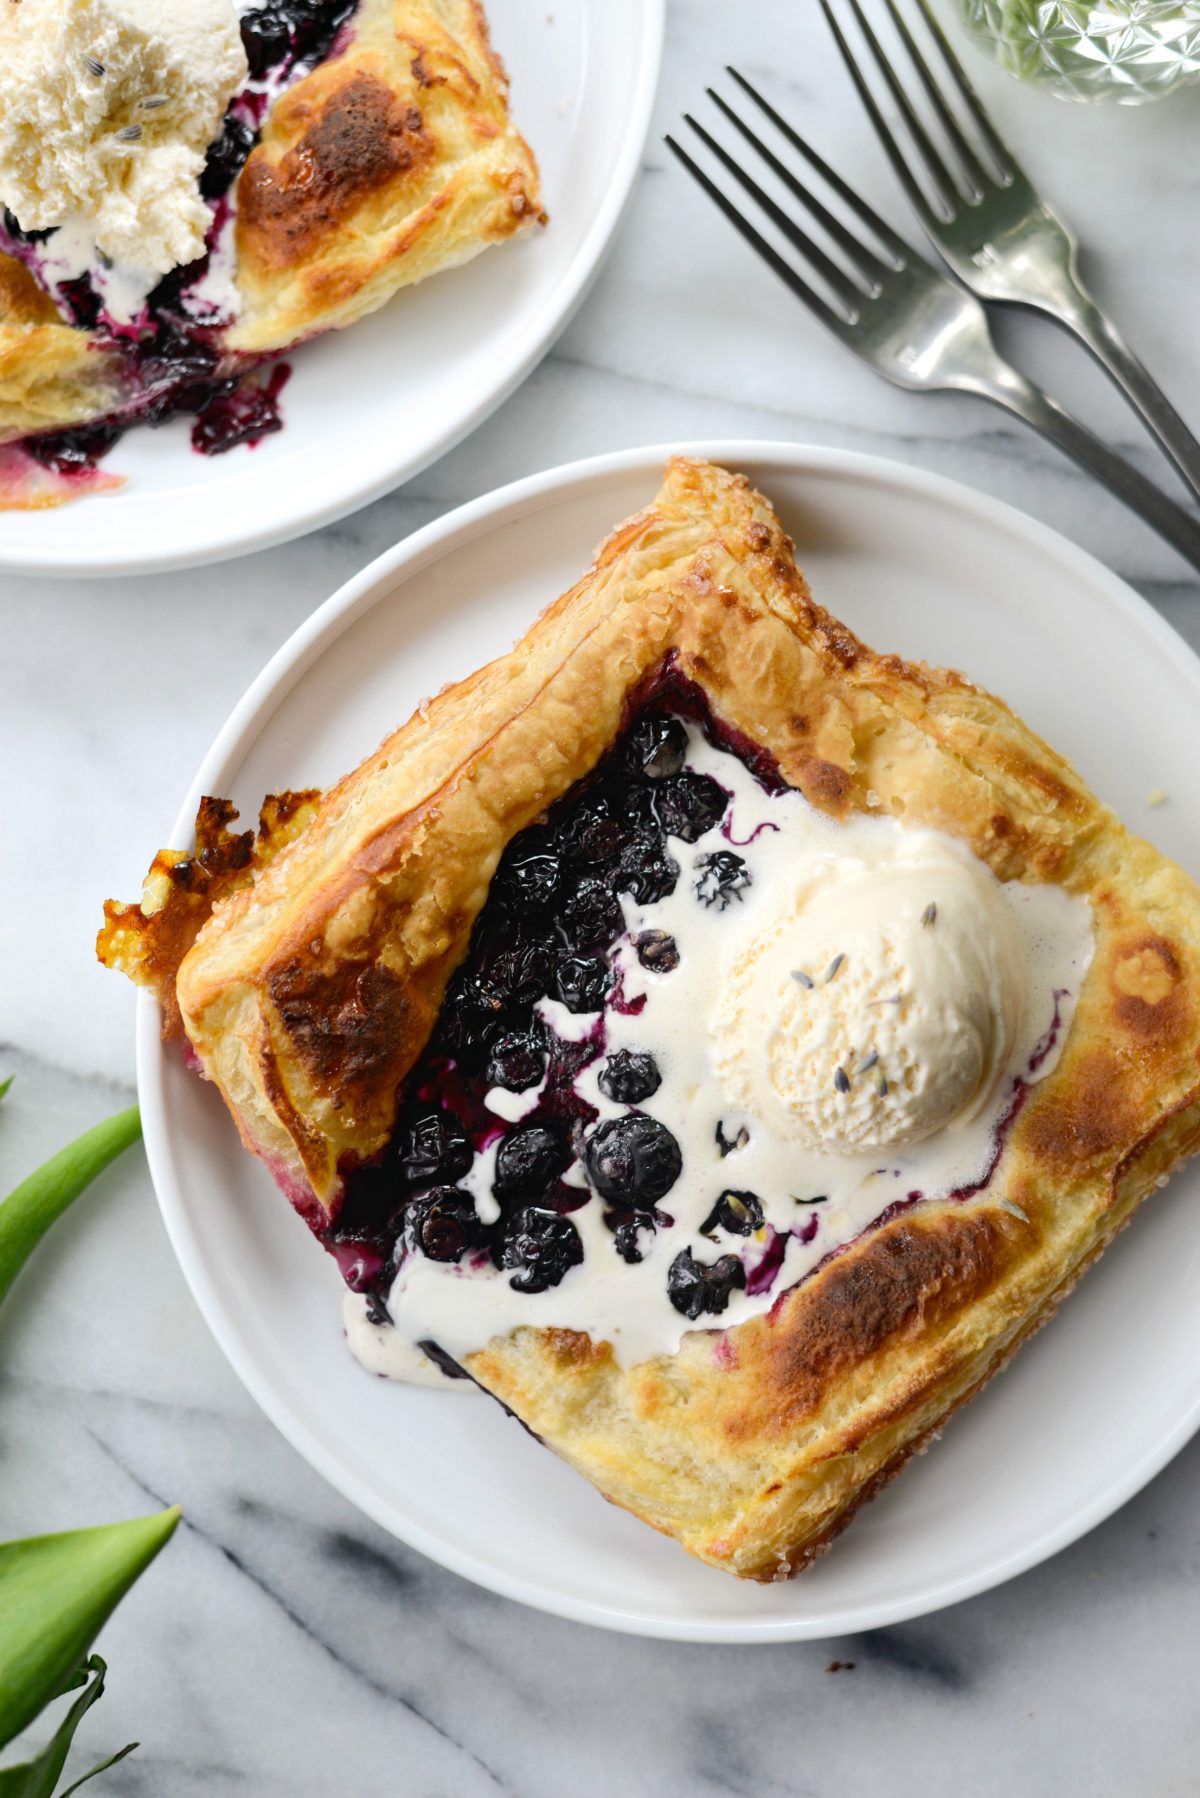 baked and golden brown Blueberry Lavender Pastry Pies